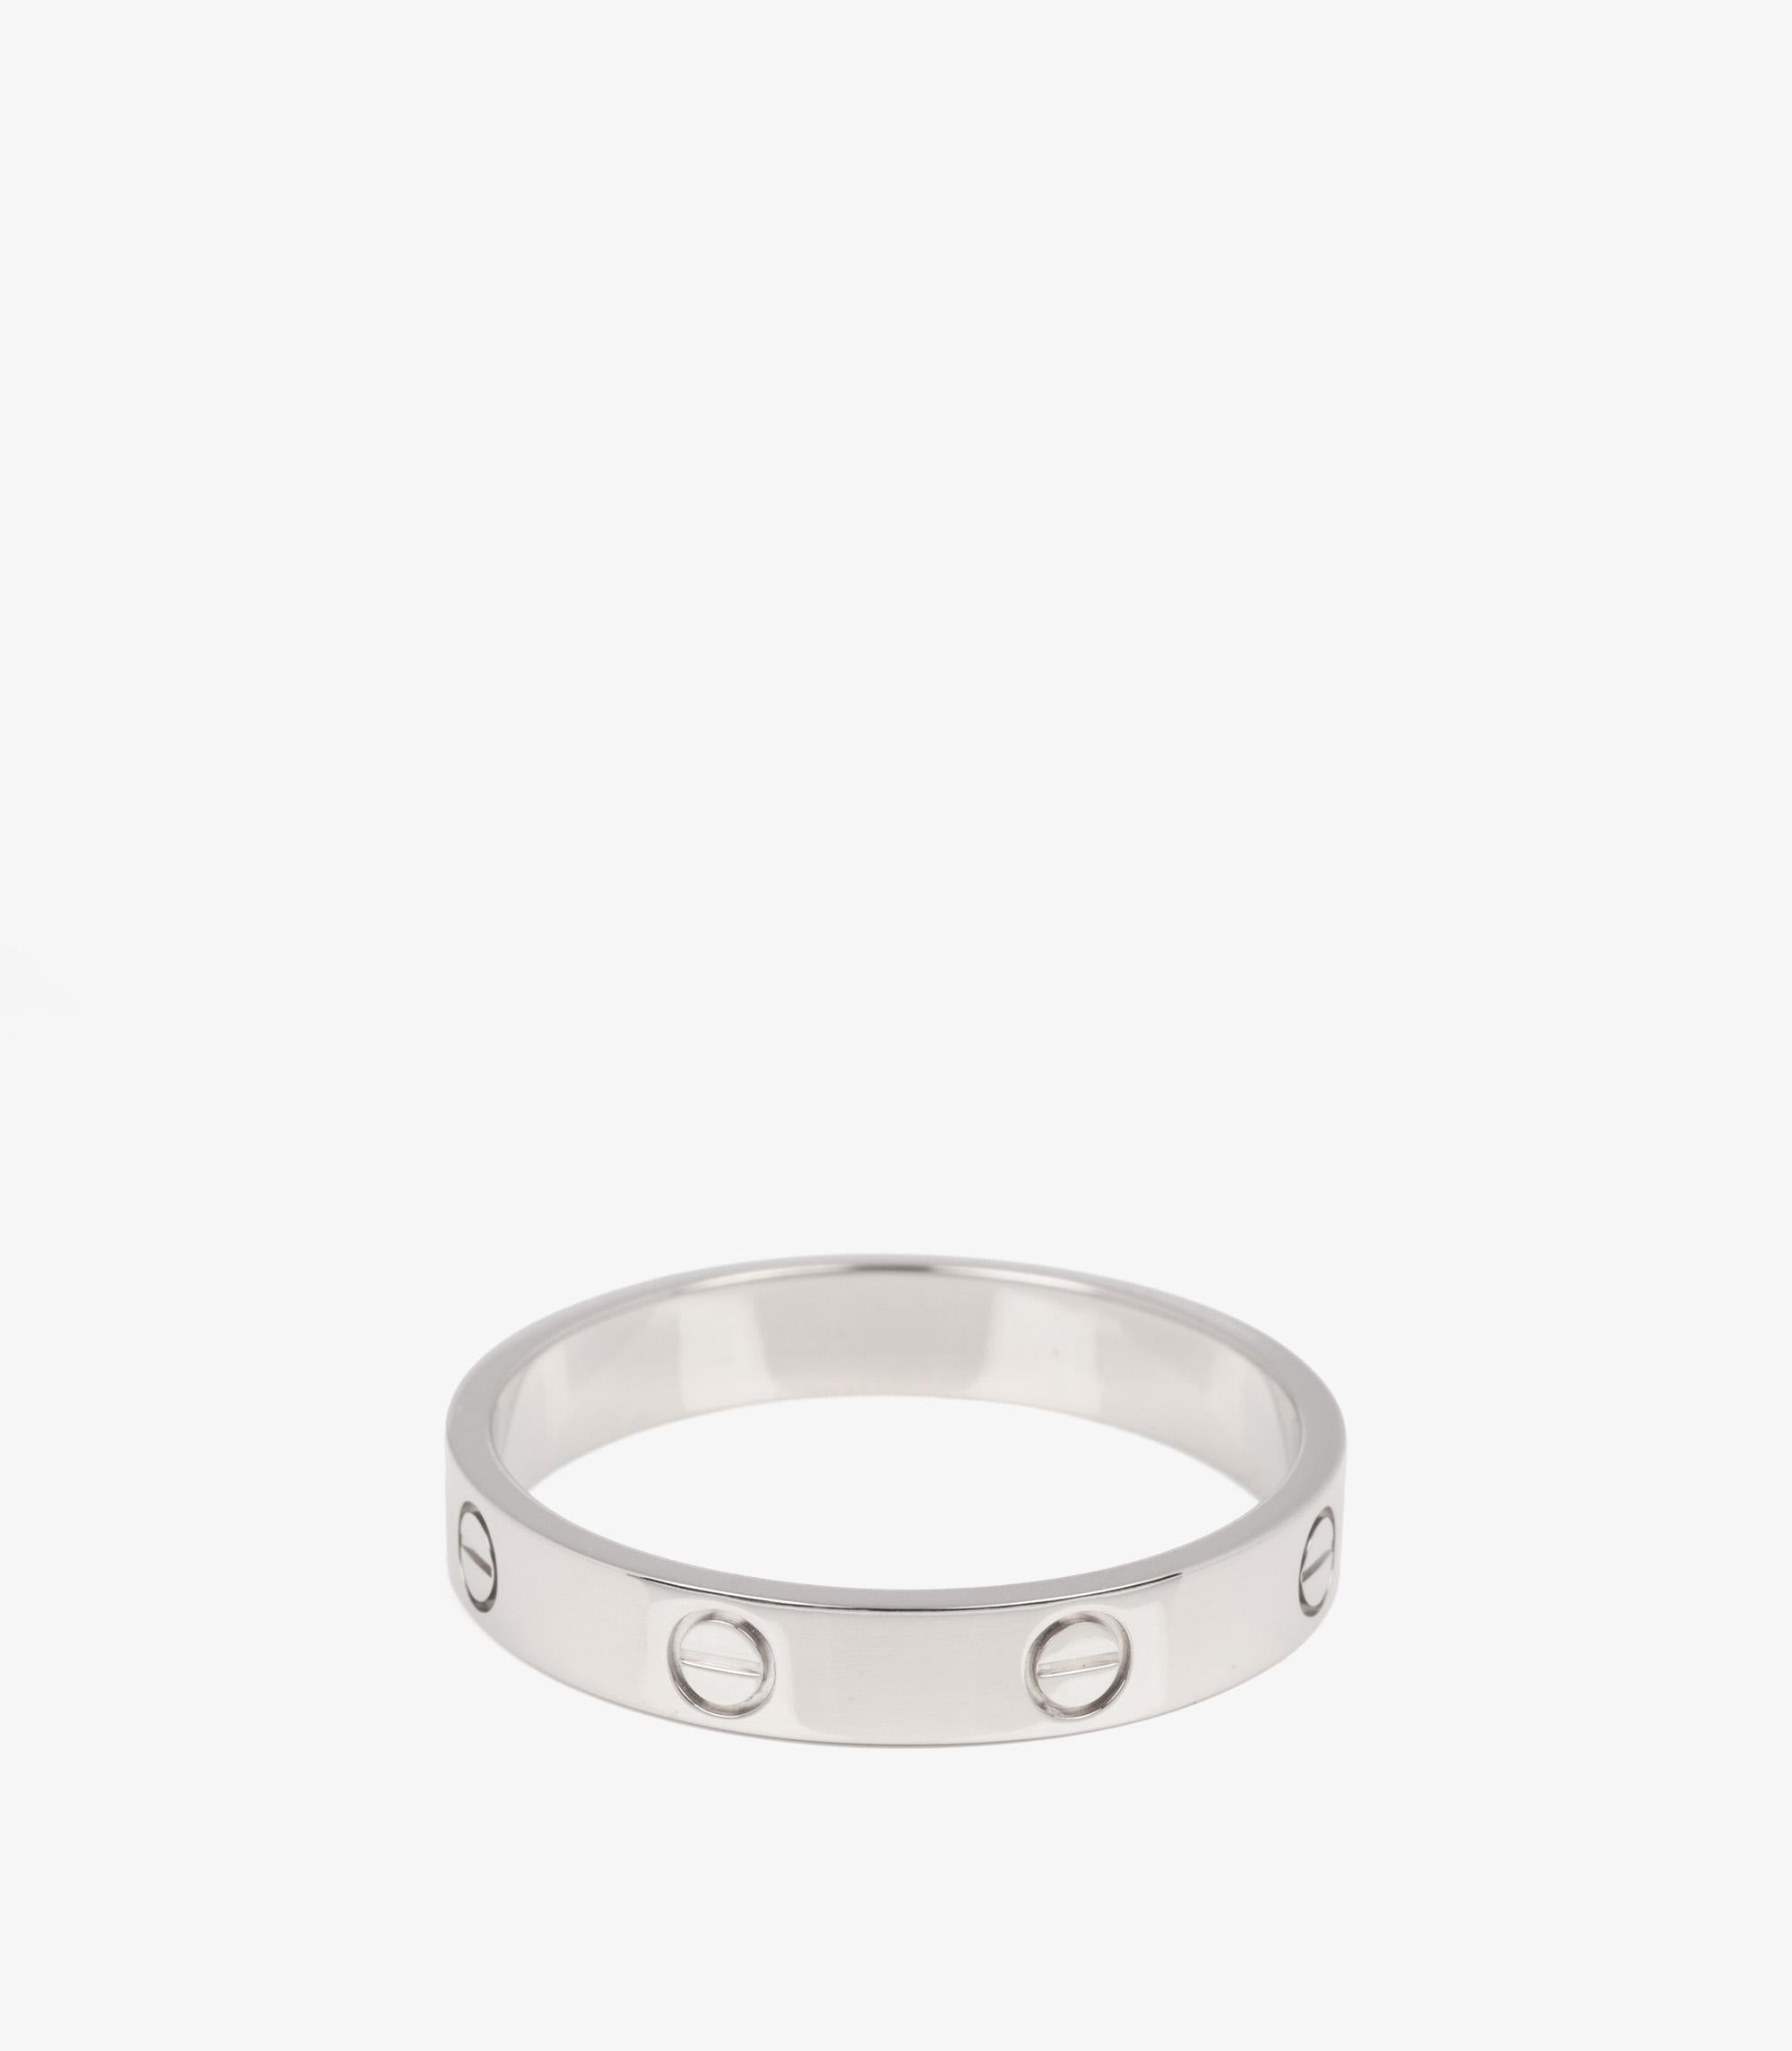 Cartier 18ct White Gold Love Wedding Band Ring

Brand- Cartier
Model- Love Wedding Band
Product Type- Ring
Serial Number- BW****
Accompanied By- Cartier Box
Material(s)- 18ct White Gold
UK Ring Size- W 1/2
EU Ring Size- 66
US Ring Size- 11